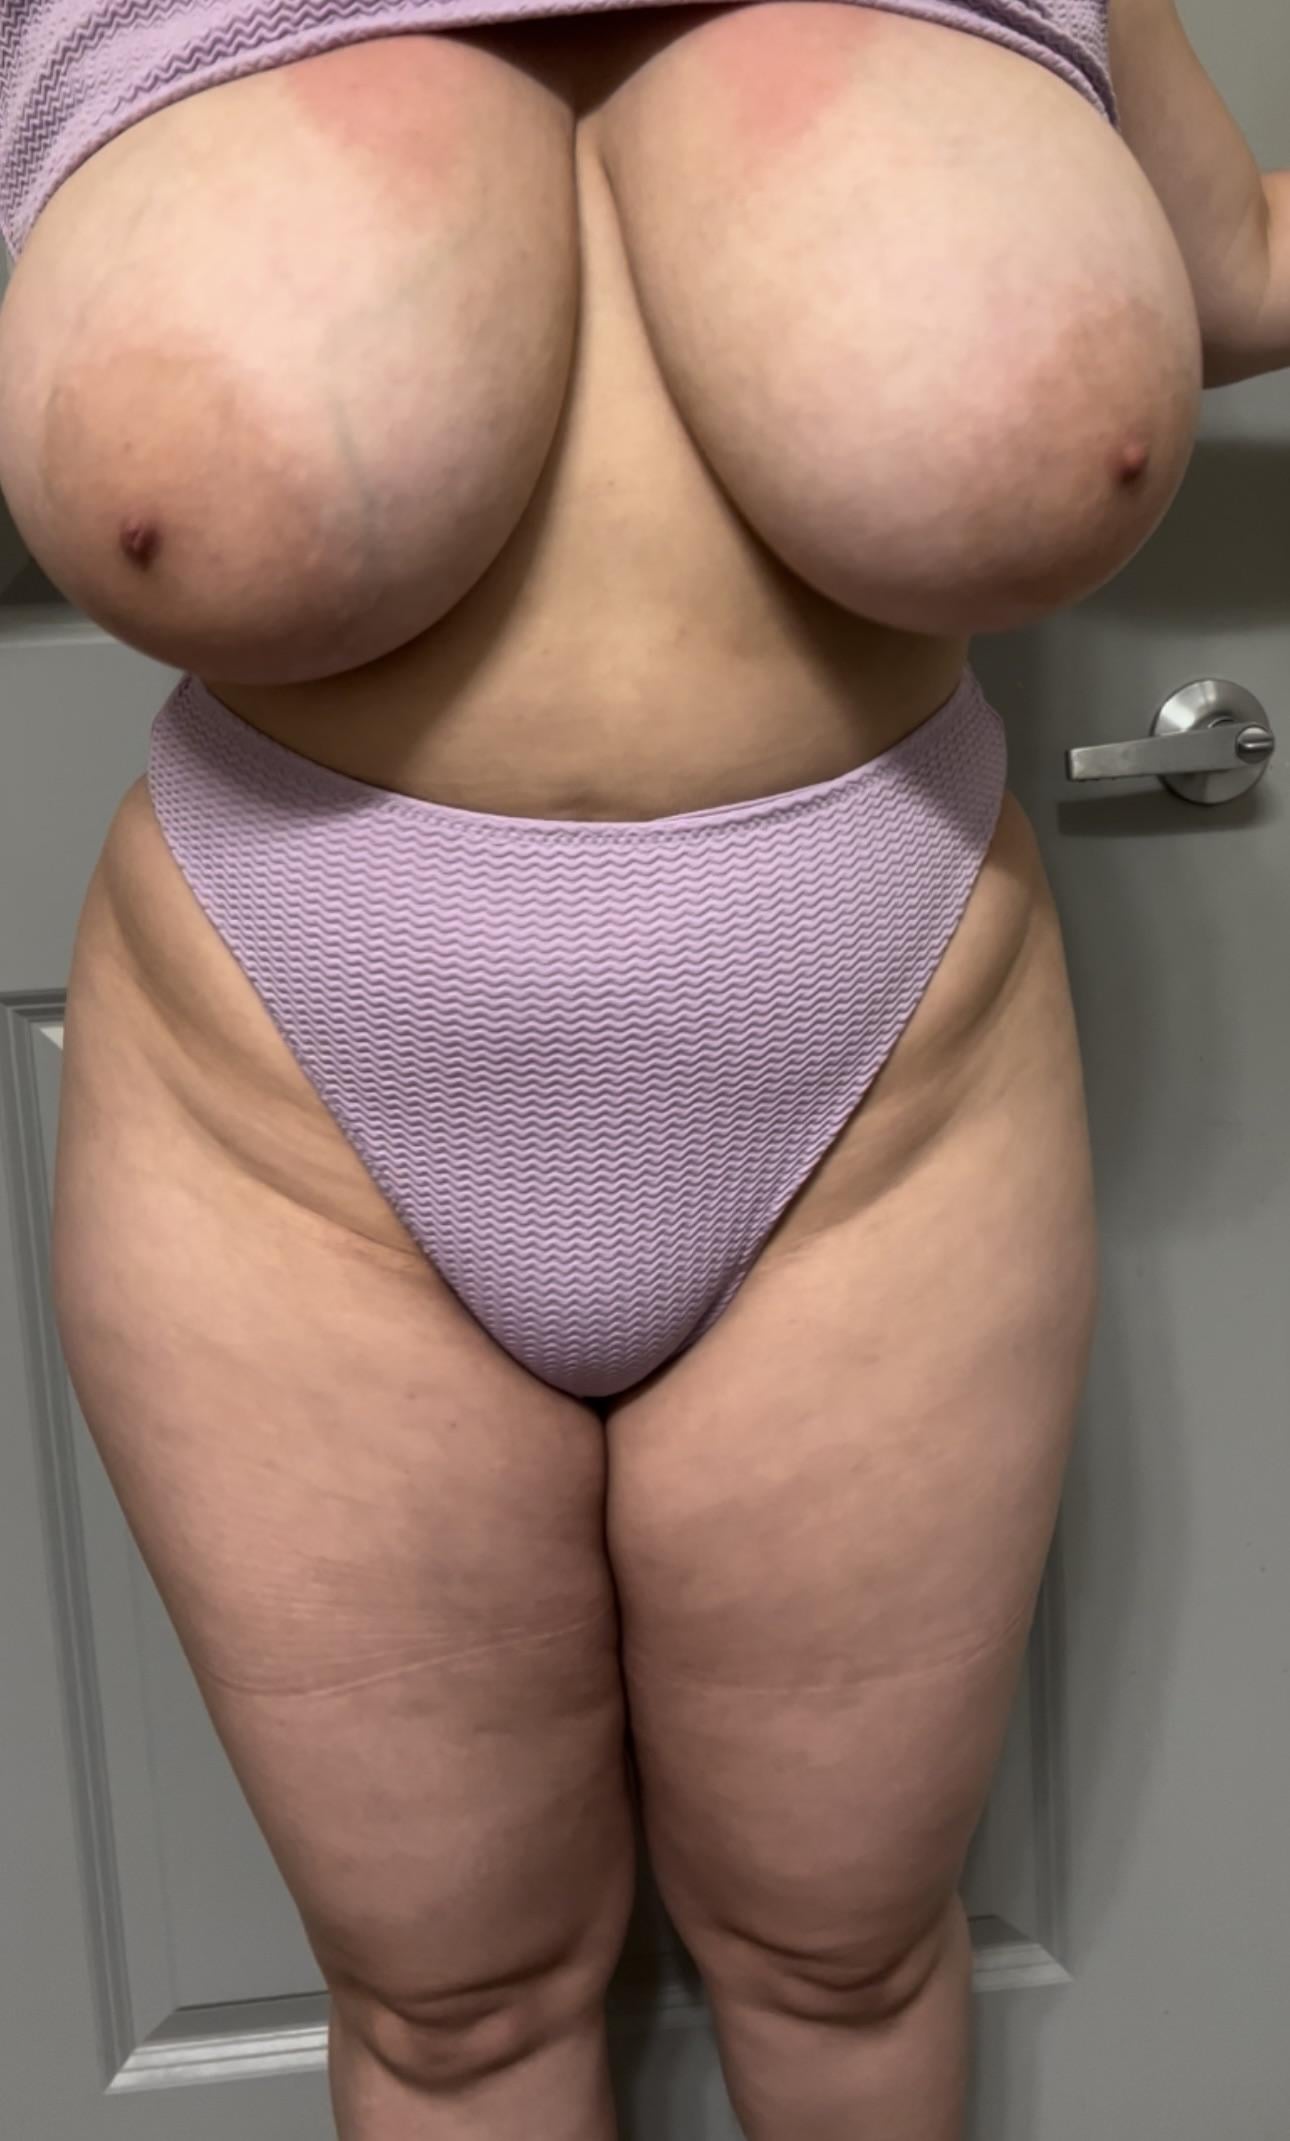 Thicker So much thick tits to play with